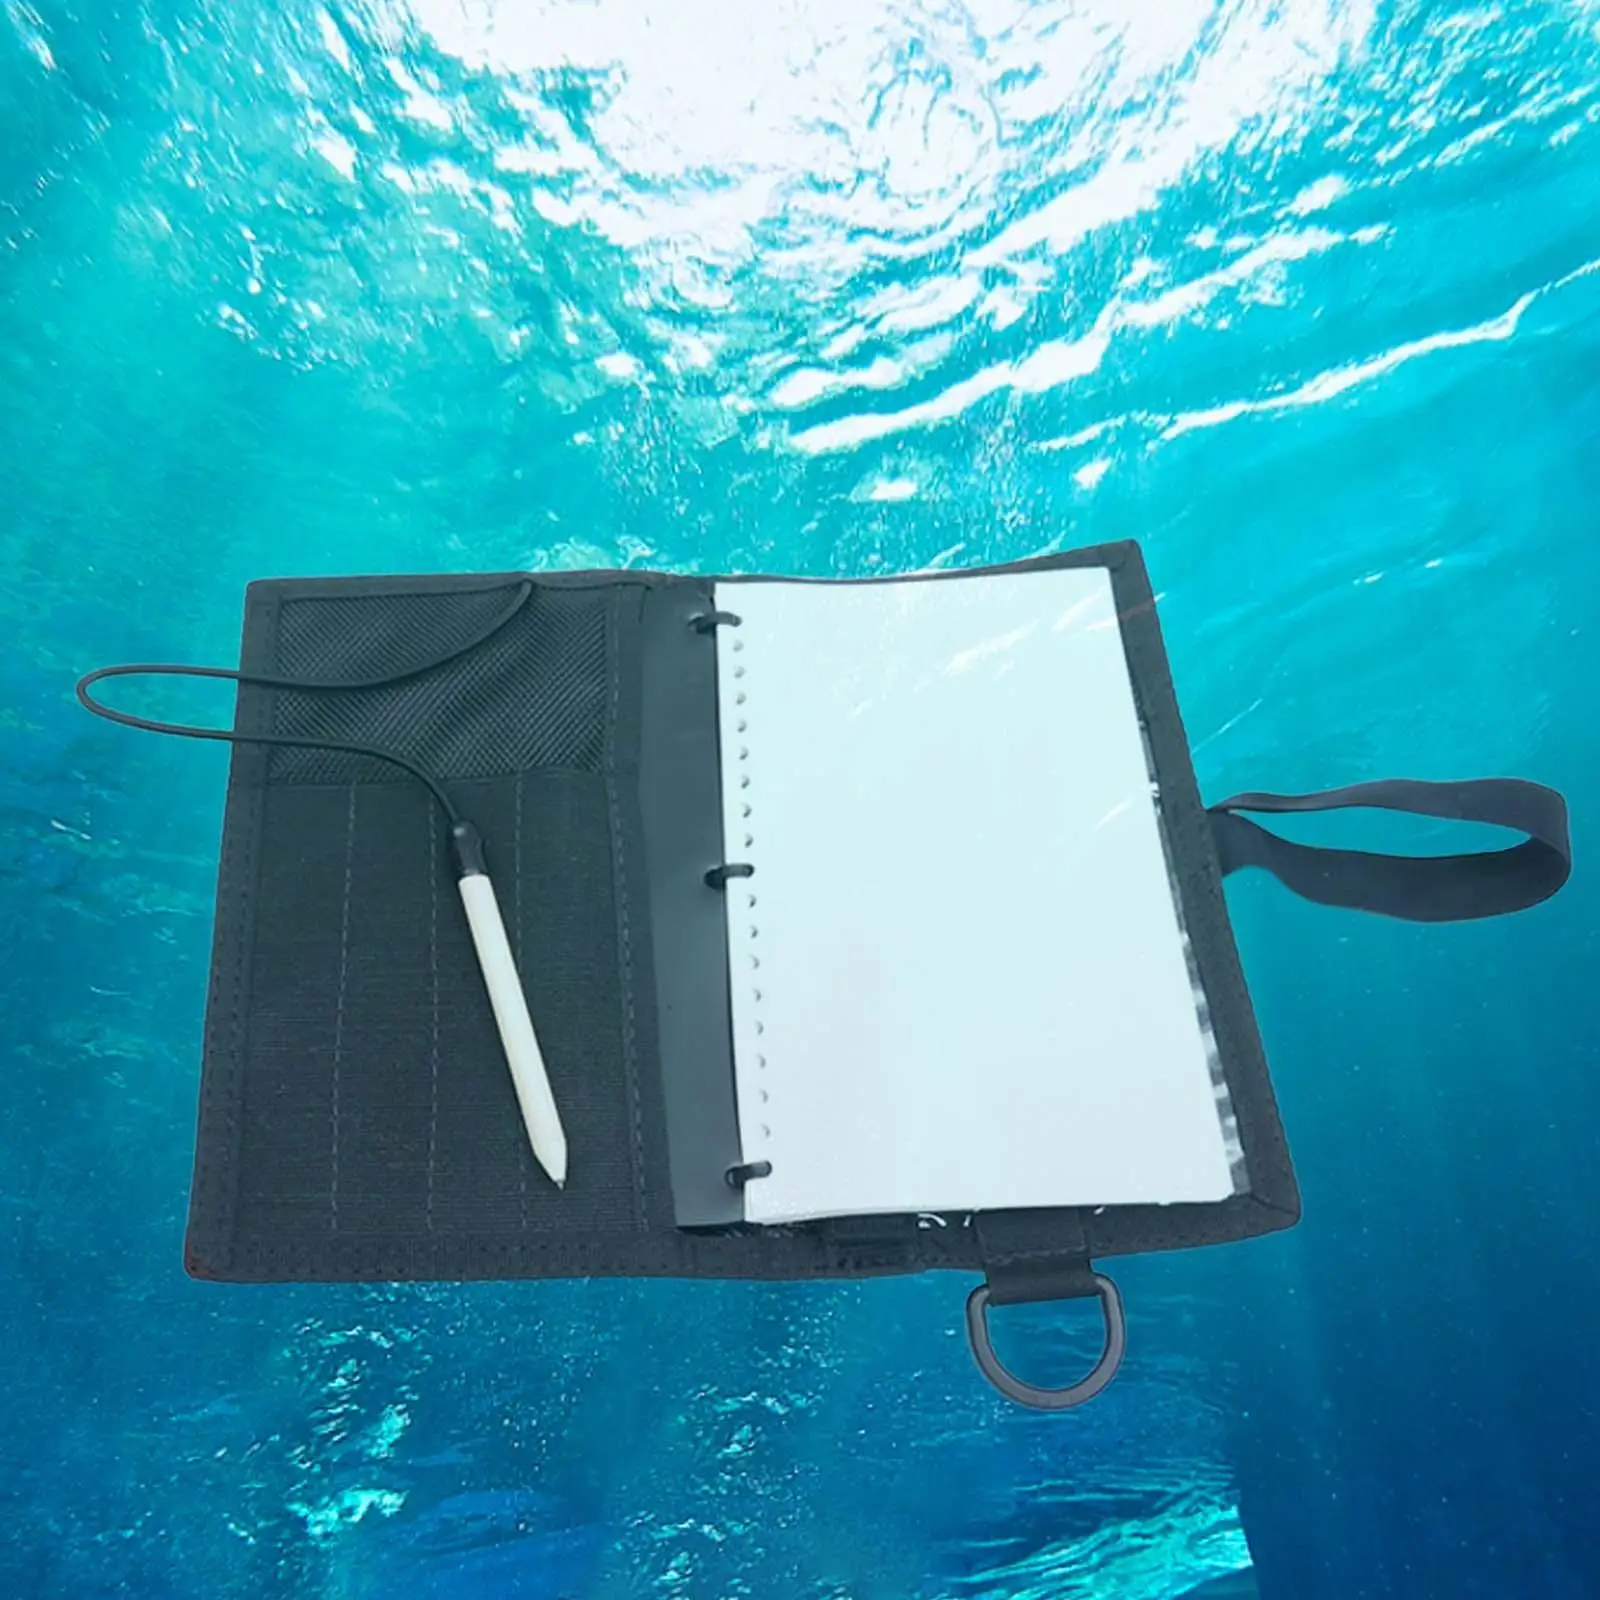 Underwater Writing Slate with Lanyard Diving Notebook for Snorkeling Making Some Notes Underwater Water Sports Scuba Swimming